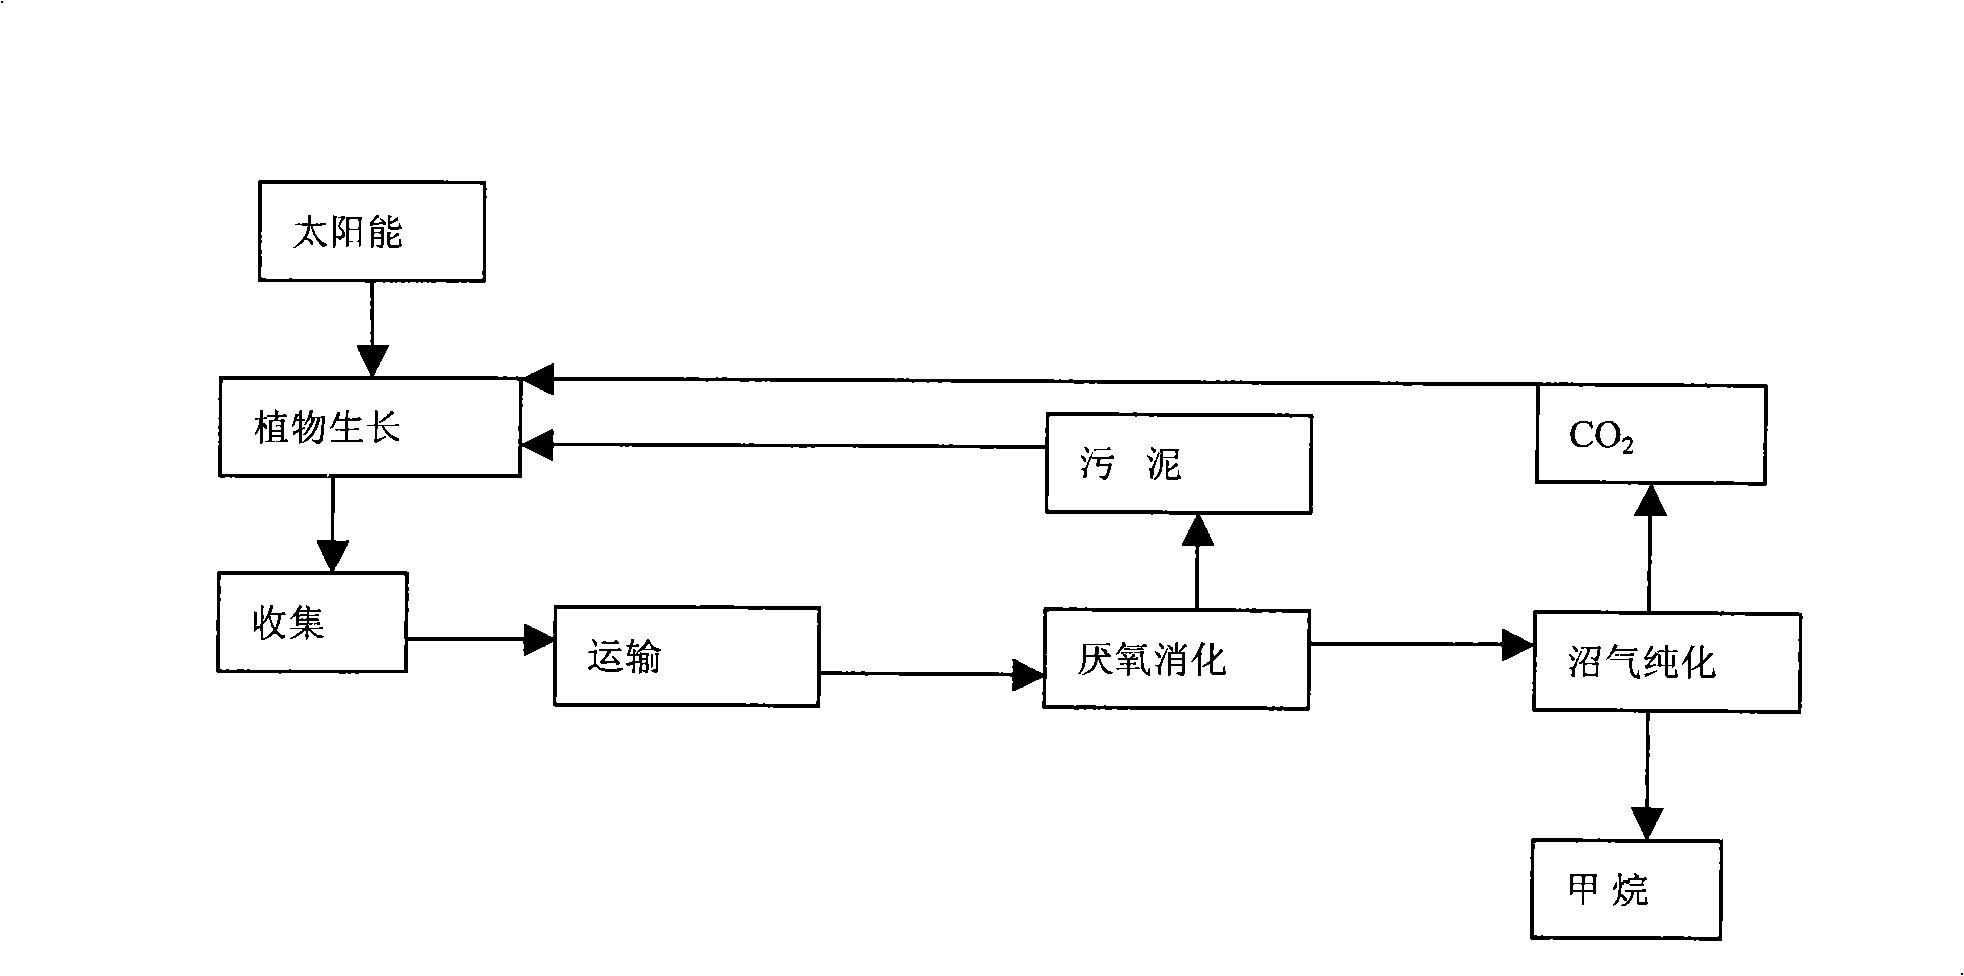 Method for producing methyl hydride and electricity with solar energy